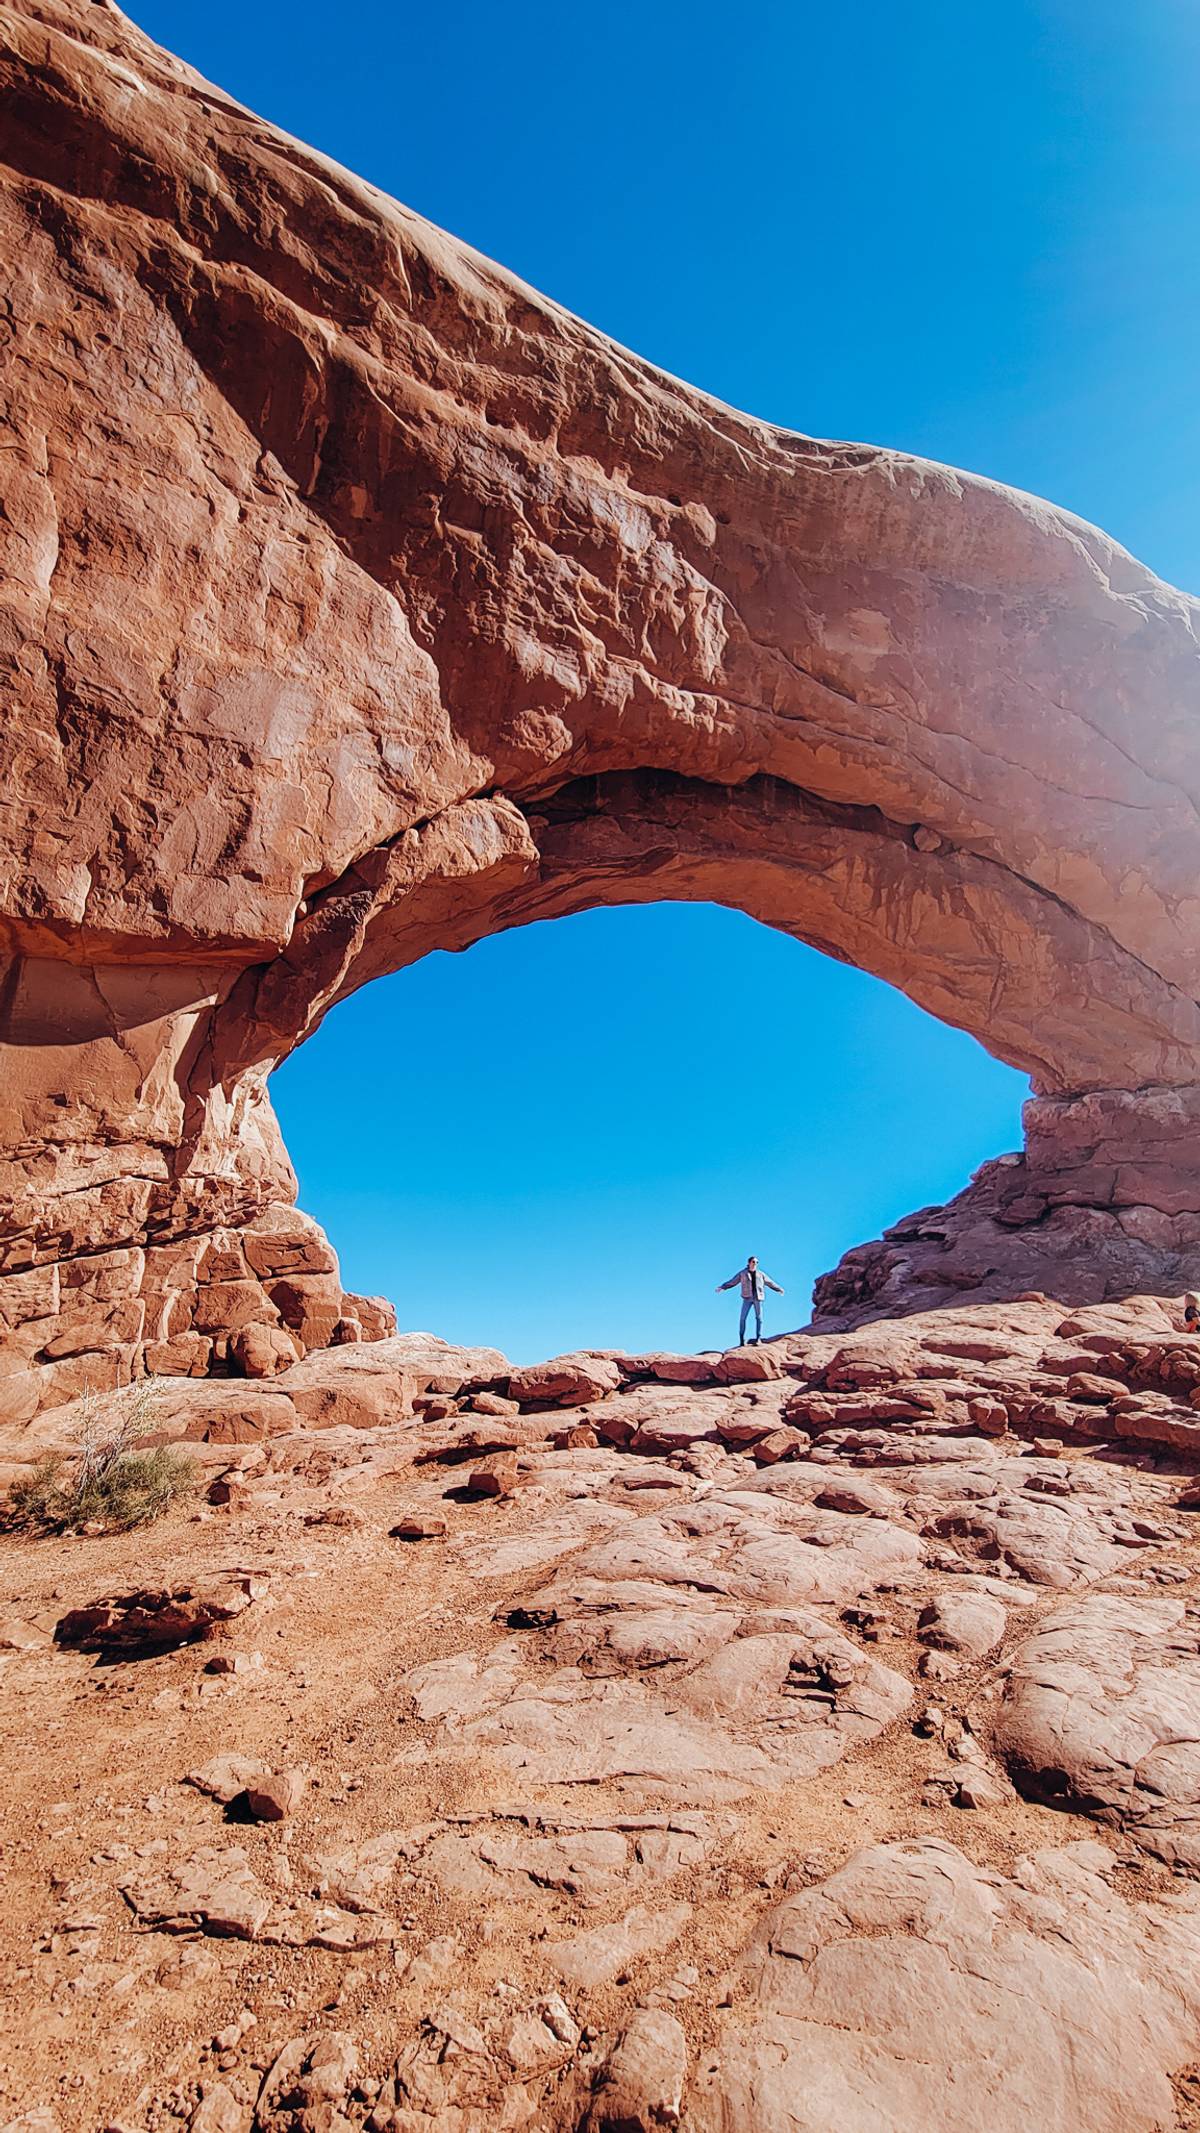 How to Spend Two Days in Moab, Utah